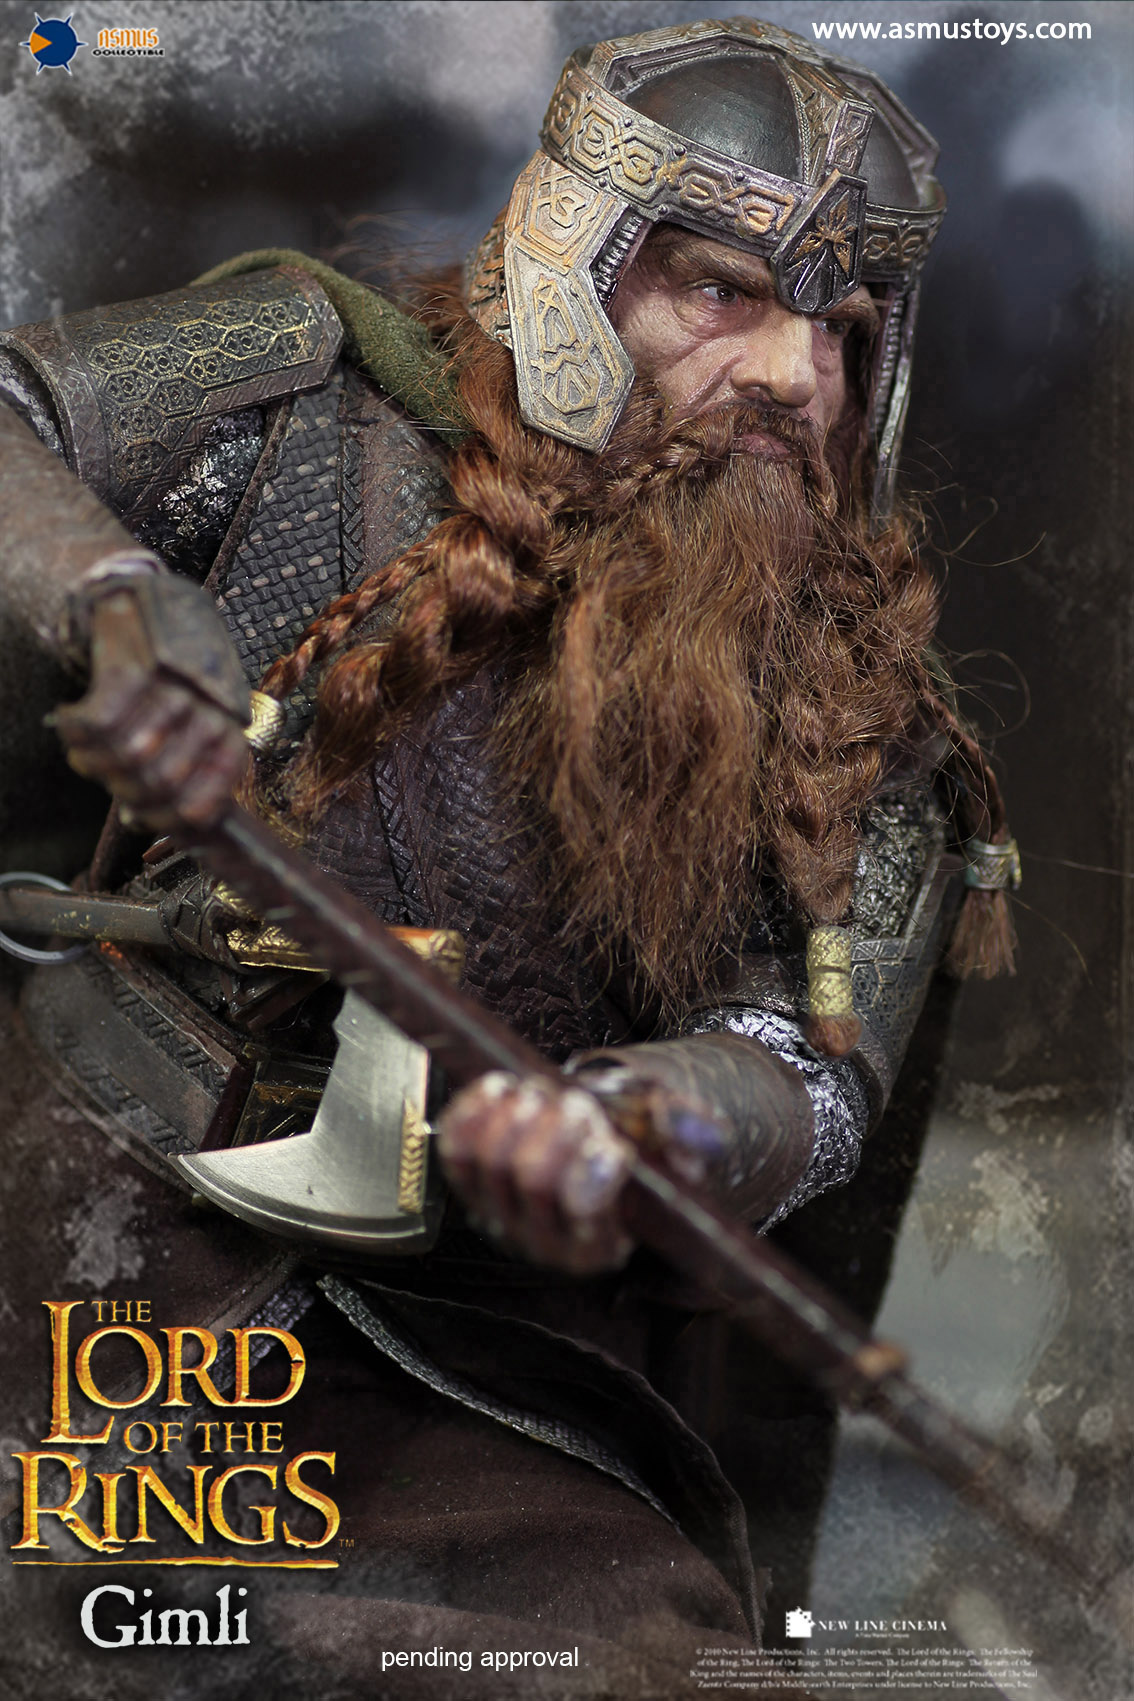 Gimli 1/6 - The Lord Of The Rings (Asmus Toys) YFpGxVkX_o